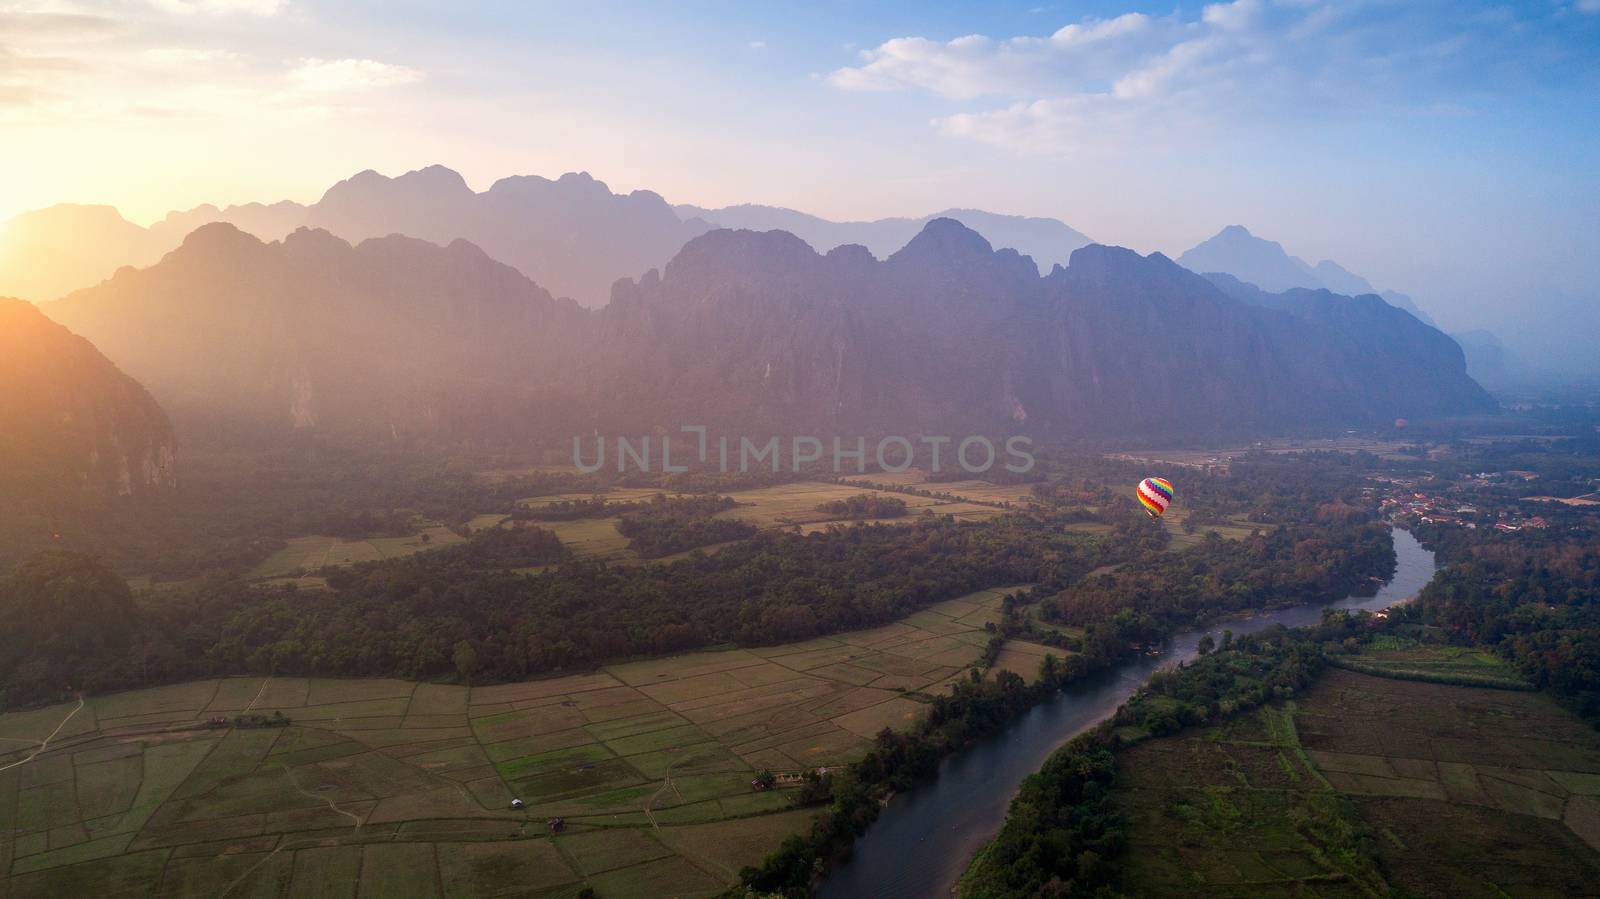 Aerial view of Vang vieng with mountains and balloon at sunset.